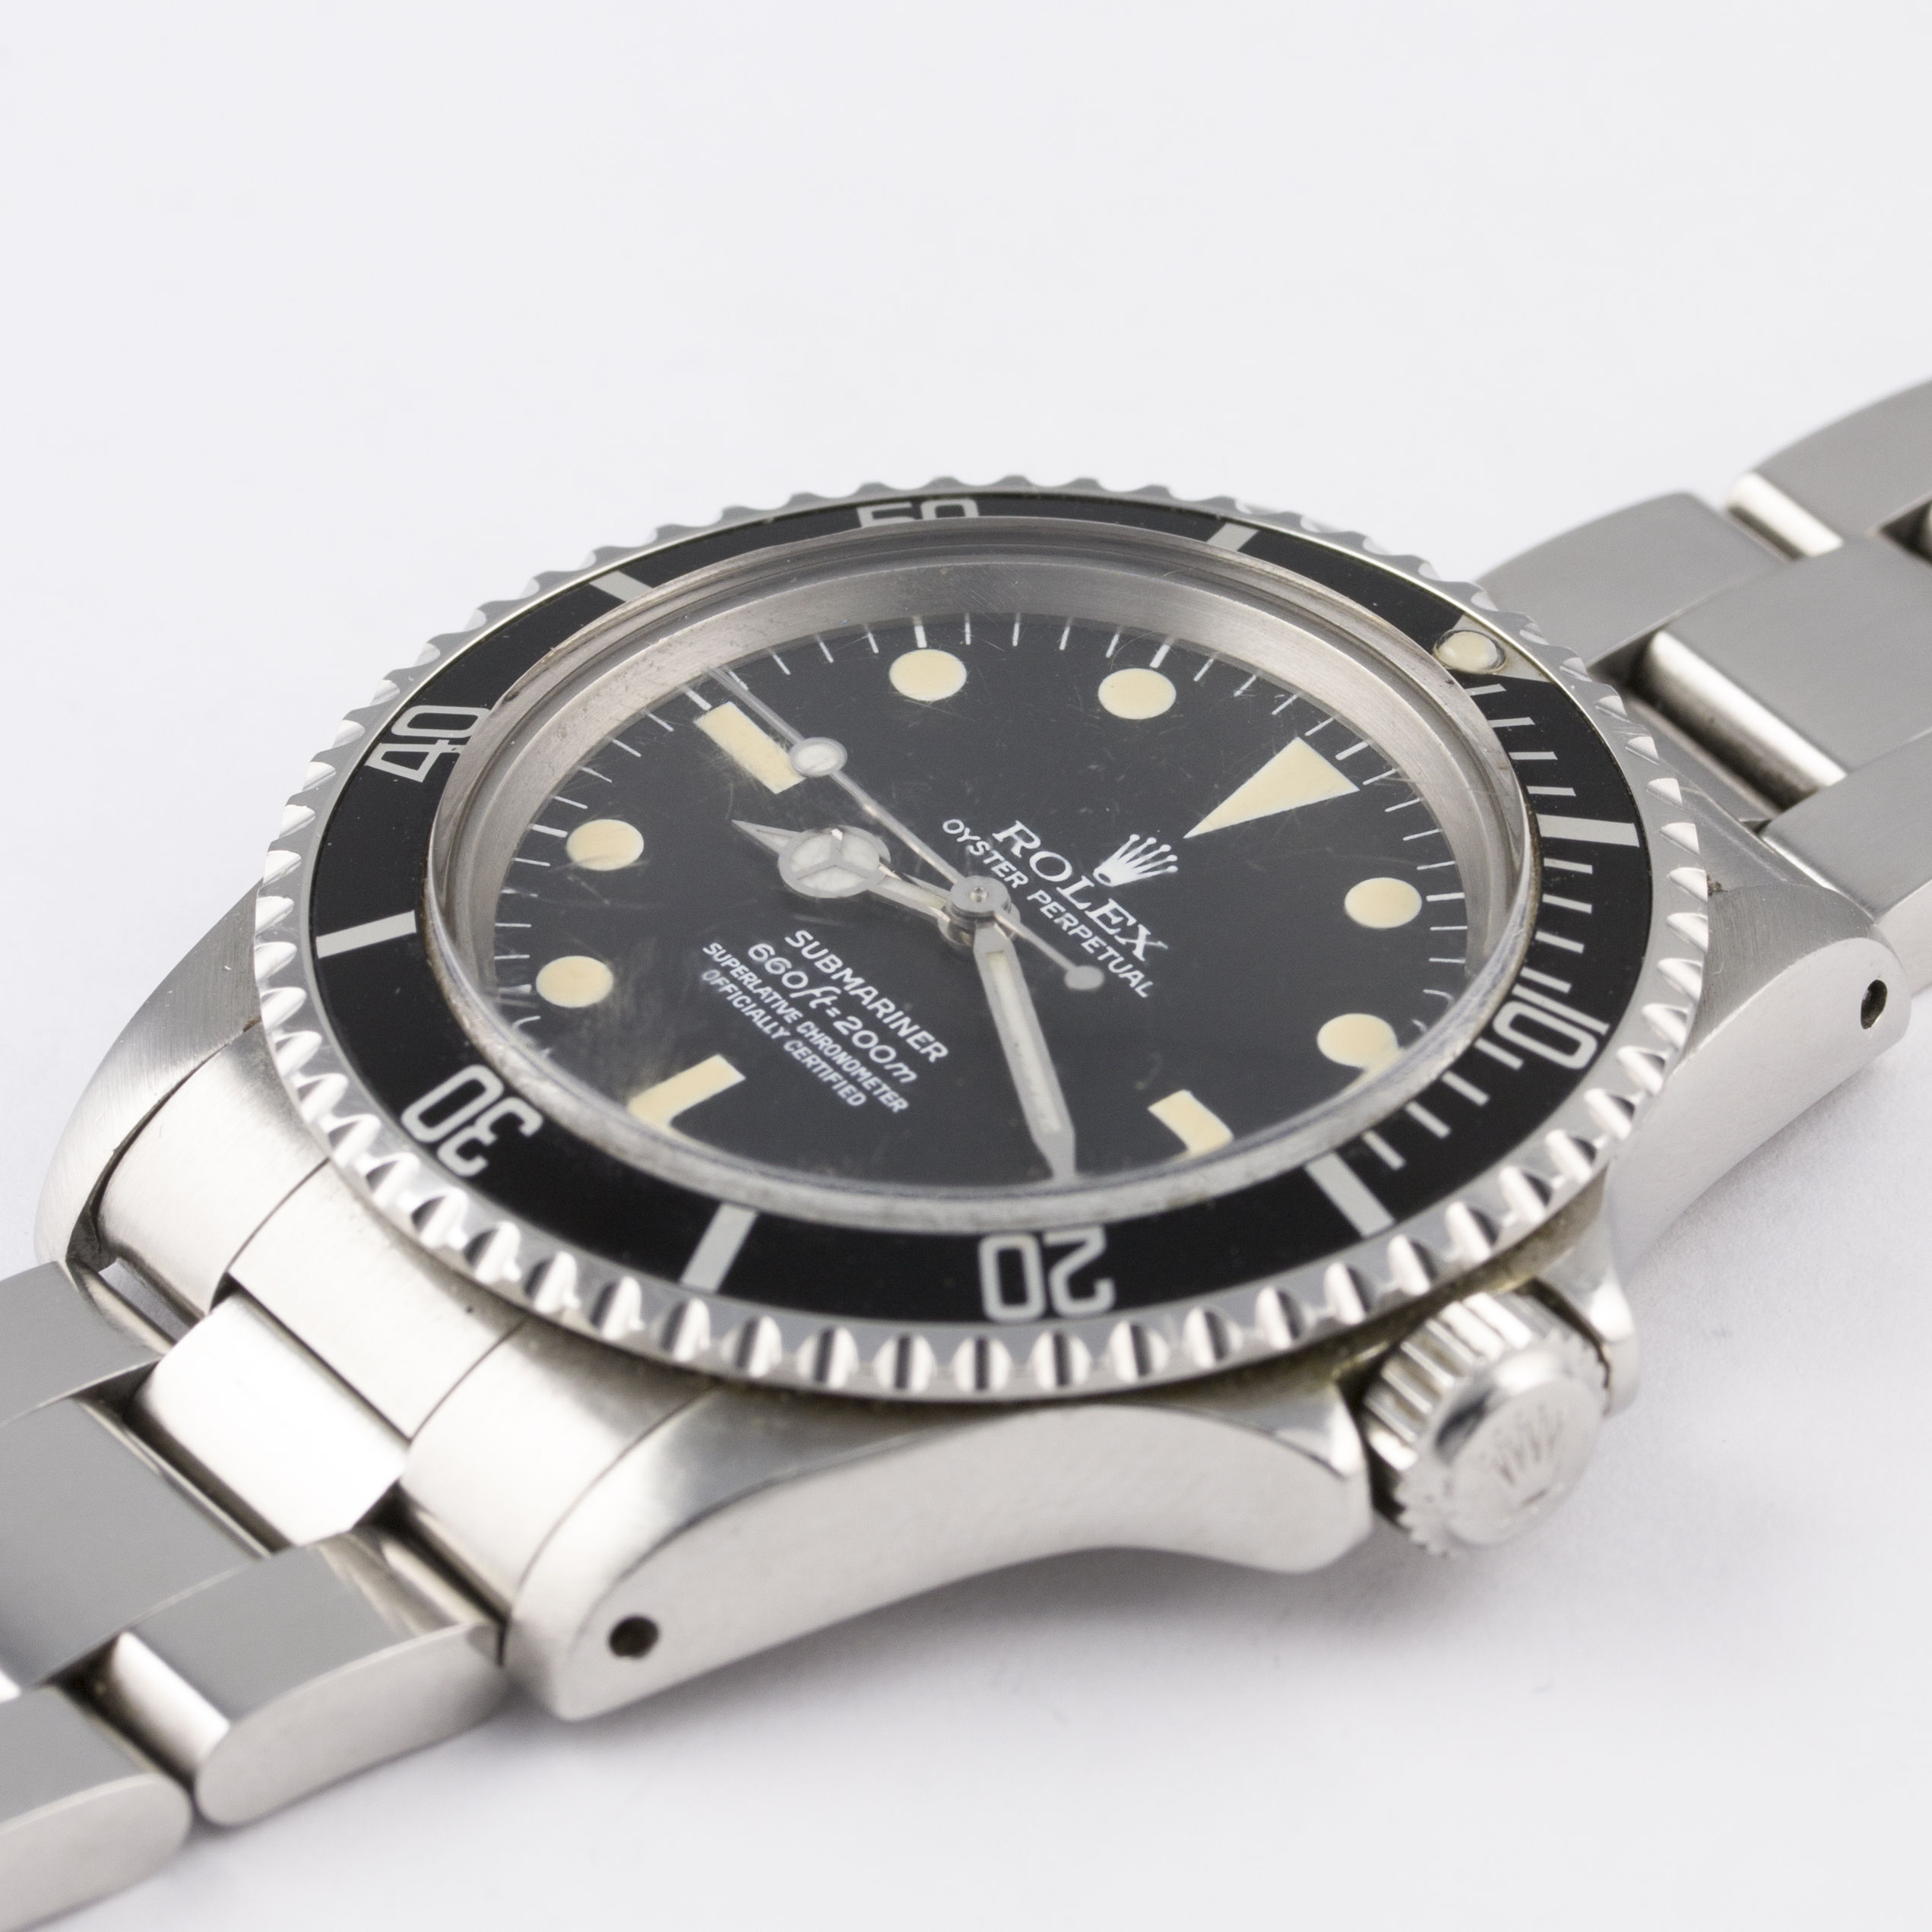 A GENTLEMAN'S STAINLESS STEEL ROLEX OYSTER PERPETUAL SUBMARINER CHRONOMETER BRACELET WATCH CIRCA - Image 3 of 9